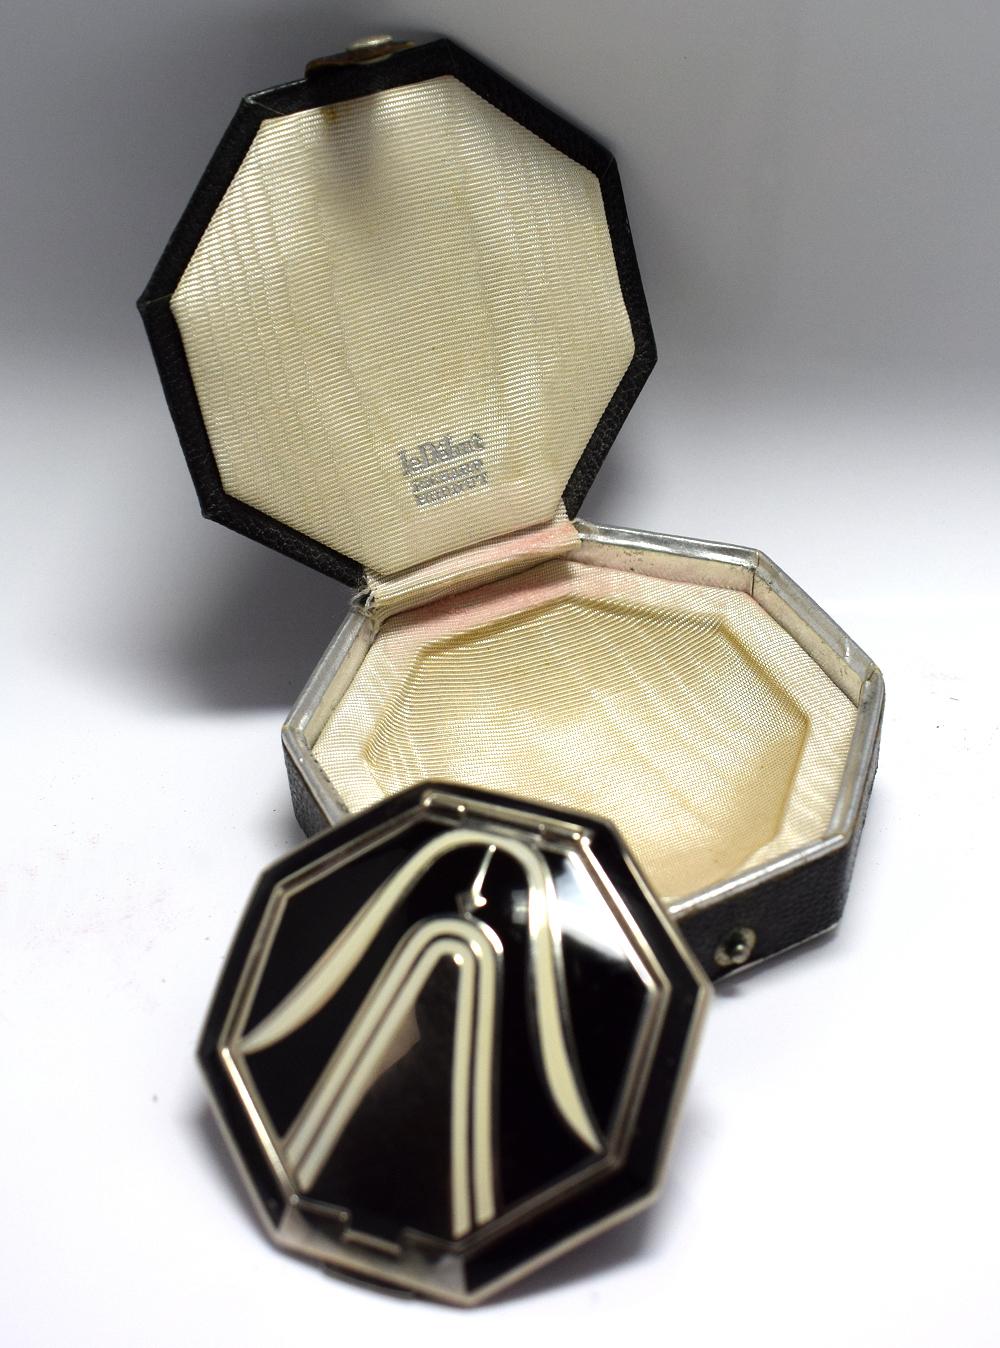 An Art Deco Richard Hudnut Le Debut 'Tulip' compact Of octagonal form, with black and ivory coloured enamelled decoration, fitted in original black leatherette box with paper label. Designed for Richard Hudnuts Deauville Line, the rouge and makeup